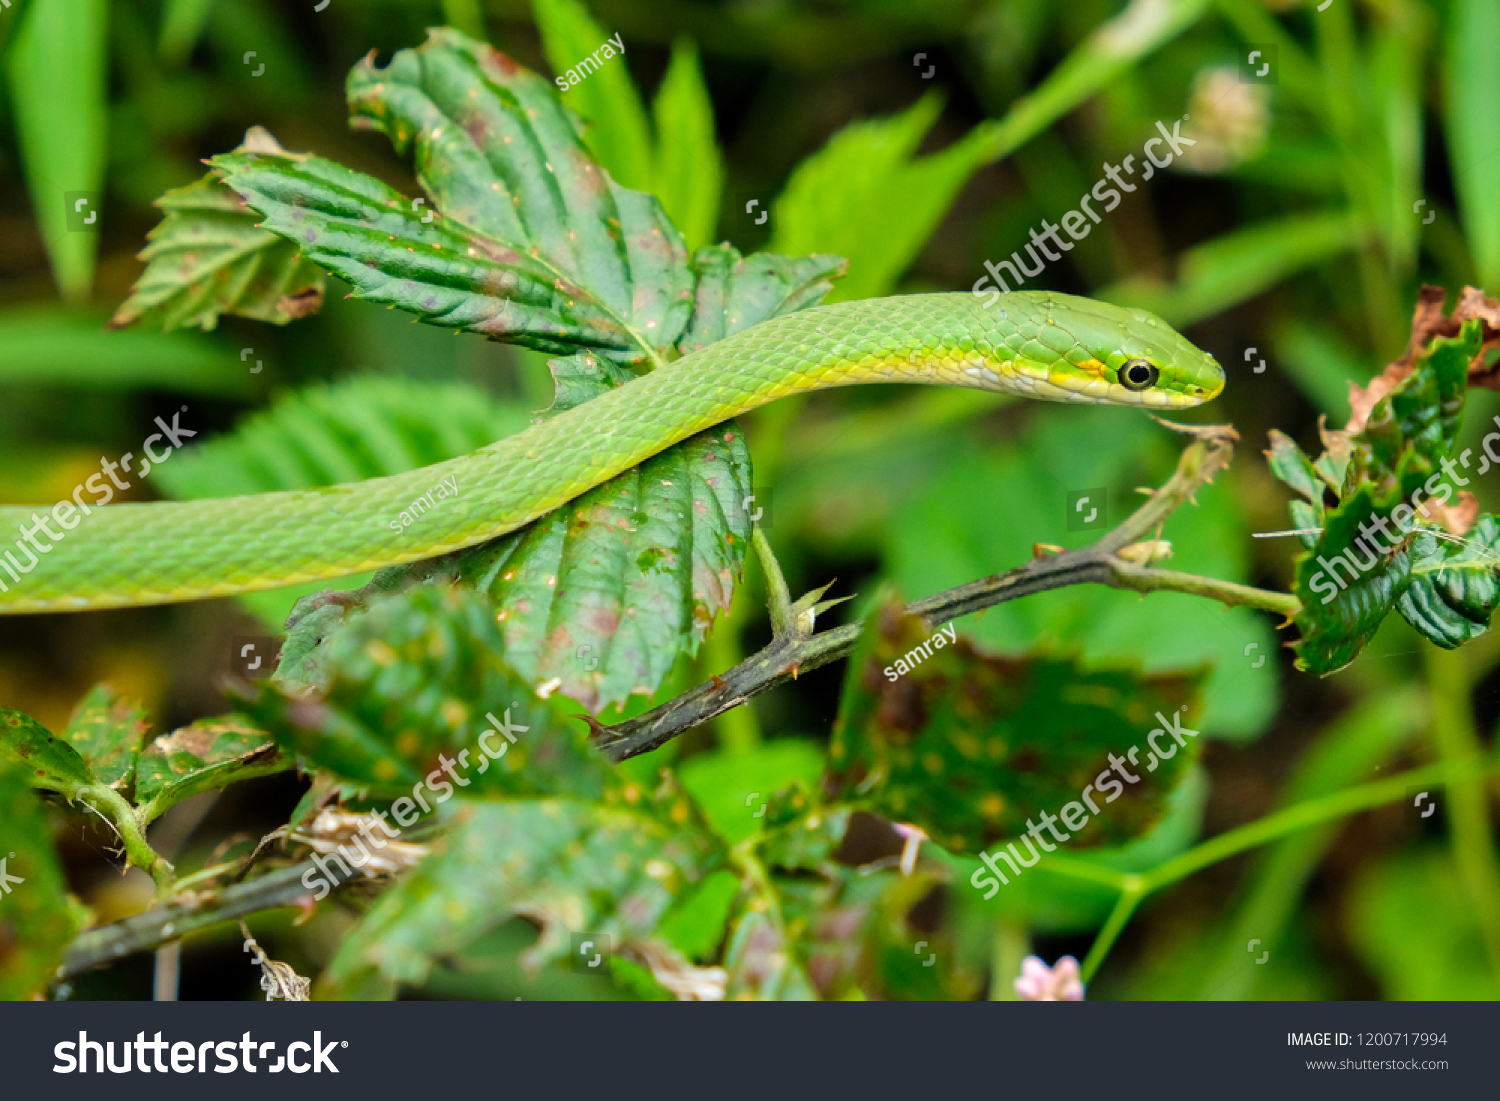 Rough Greensnake Known Green Grass Snake Stock Photo Edit Now